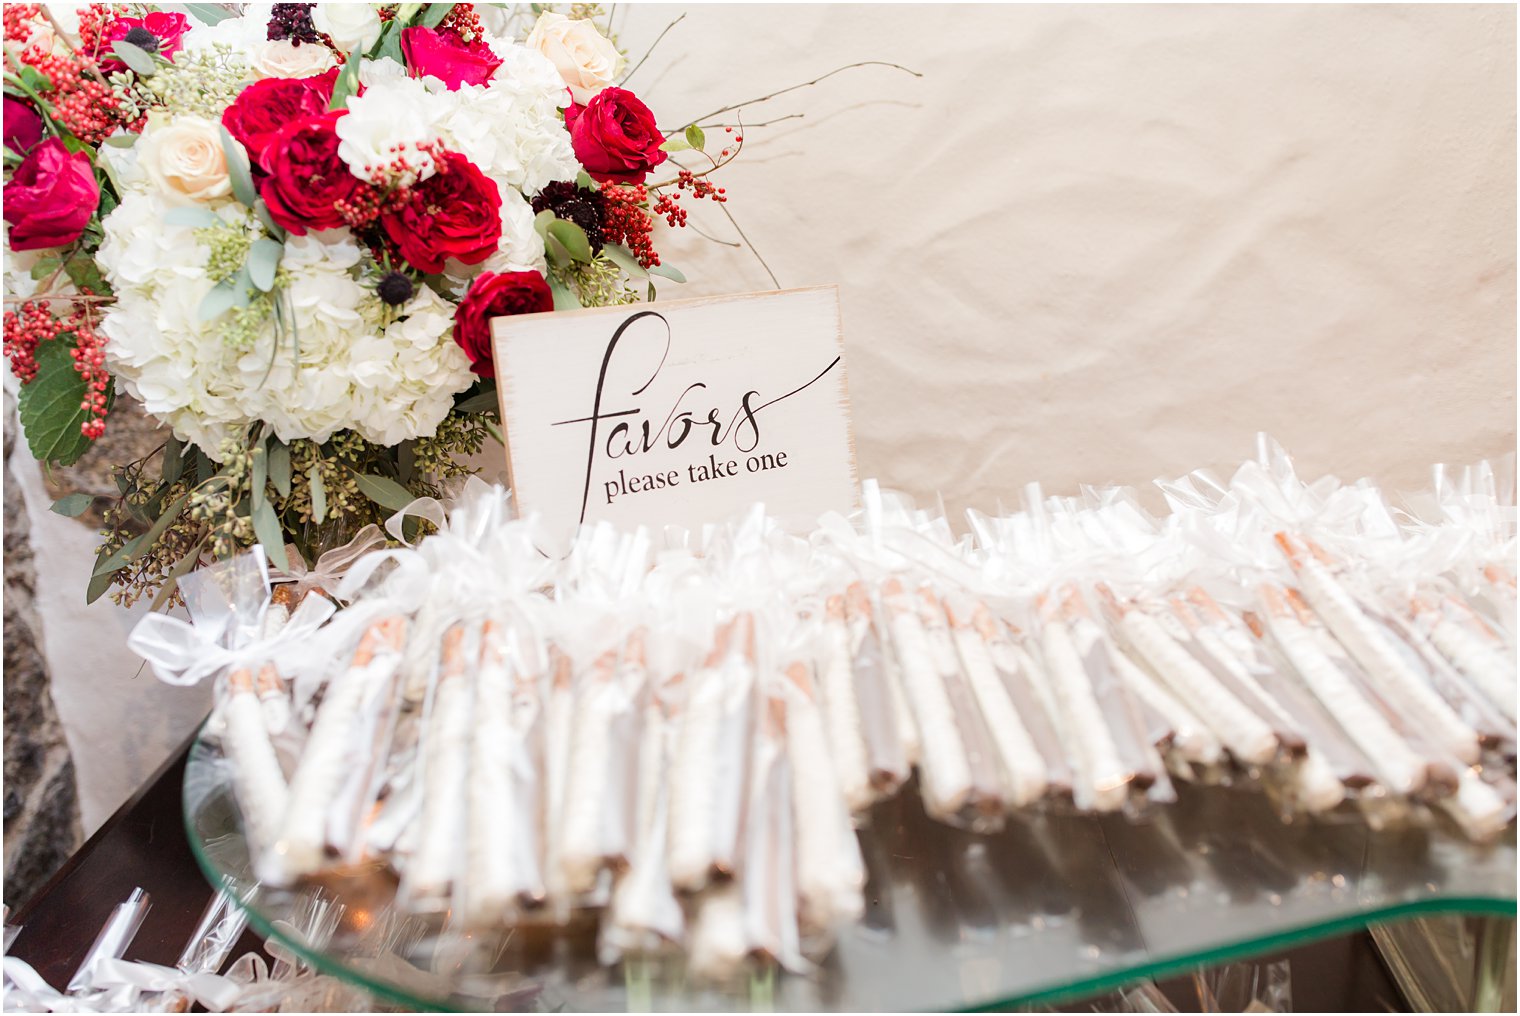 chocolate covered pretzels as wedding favors